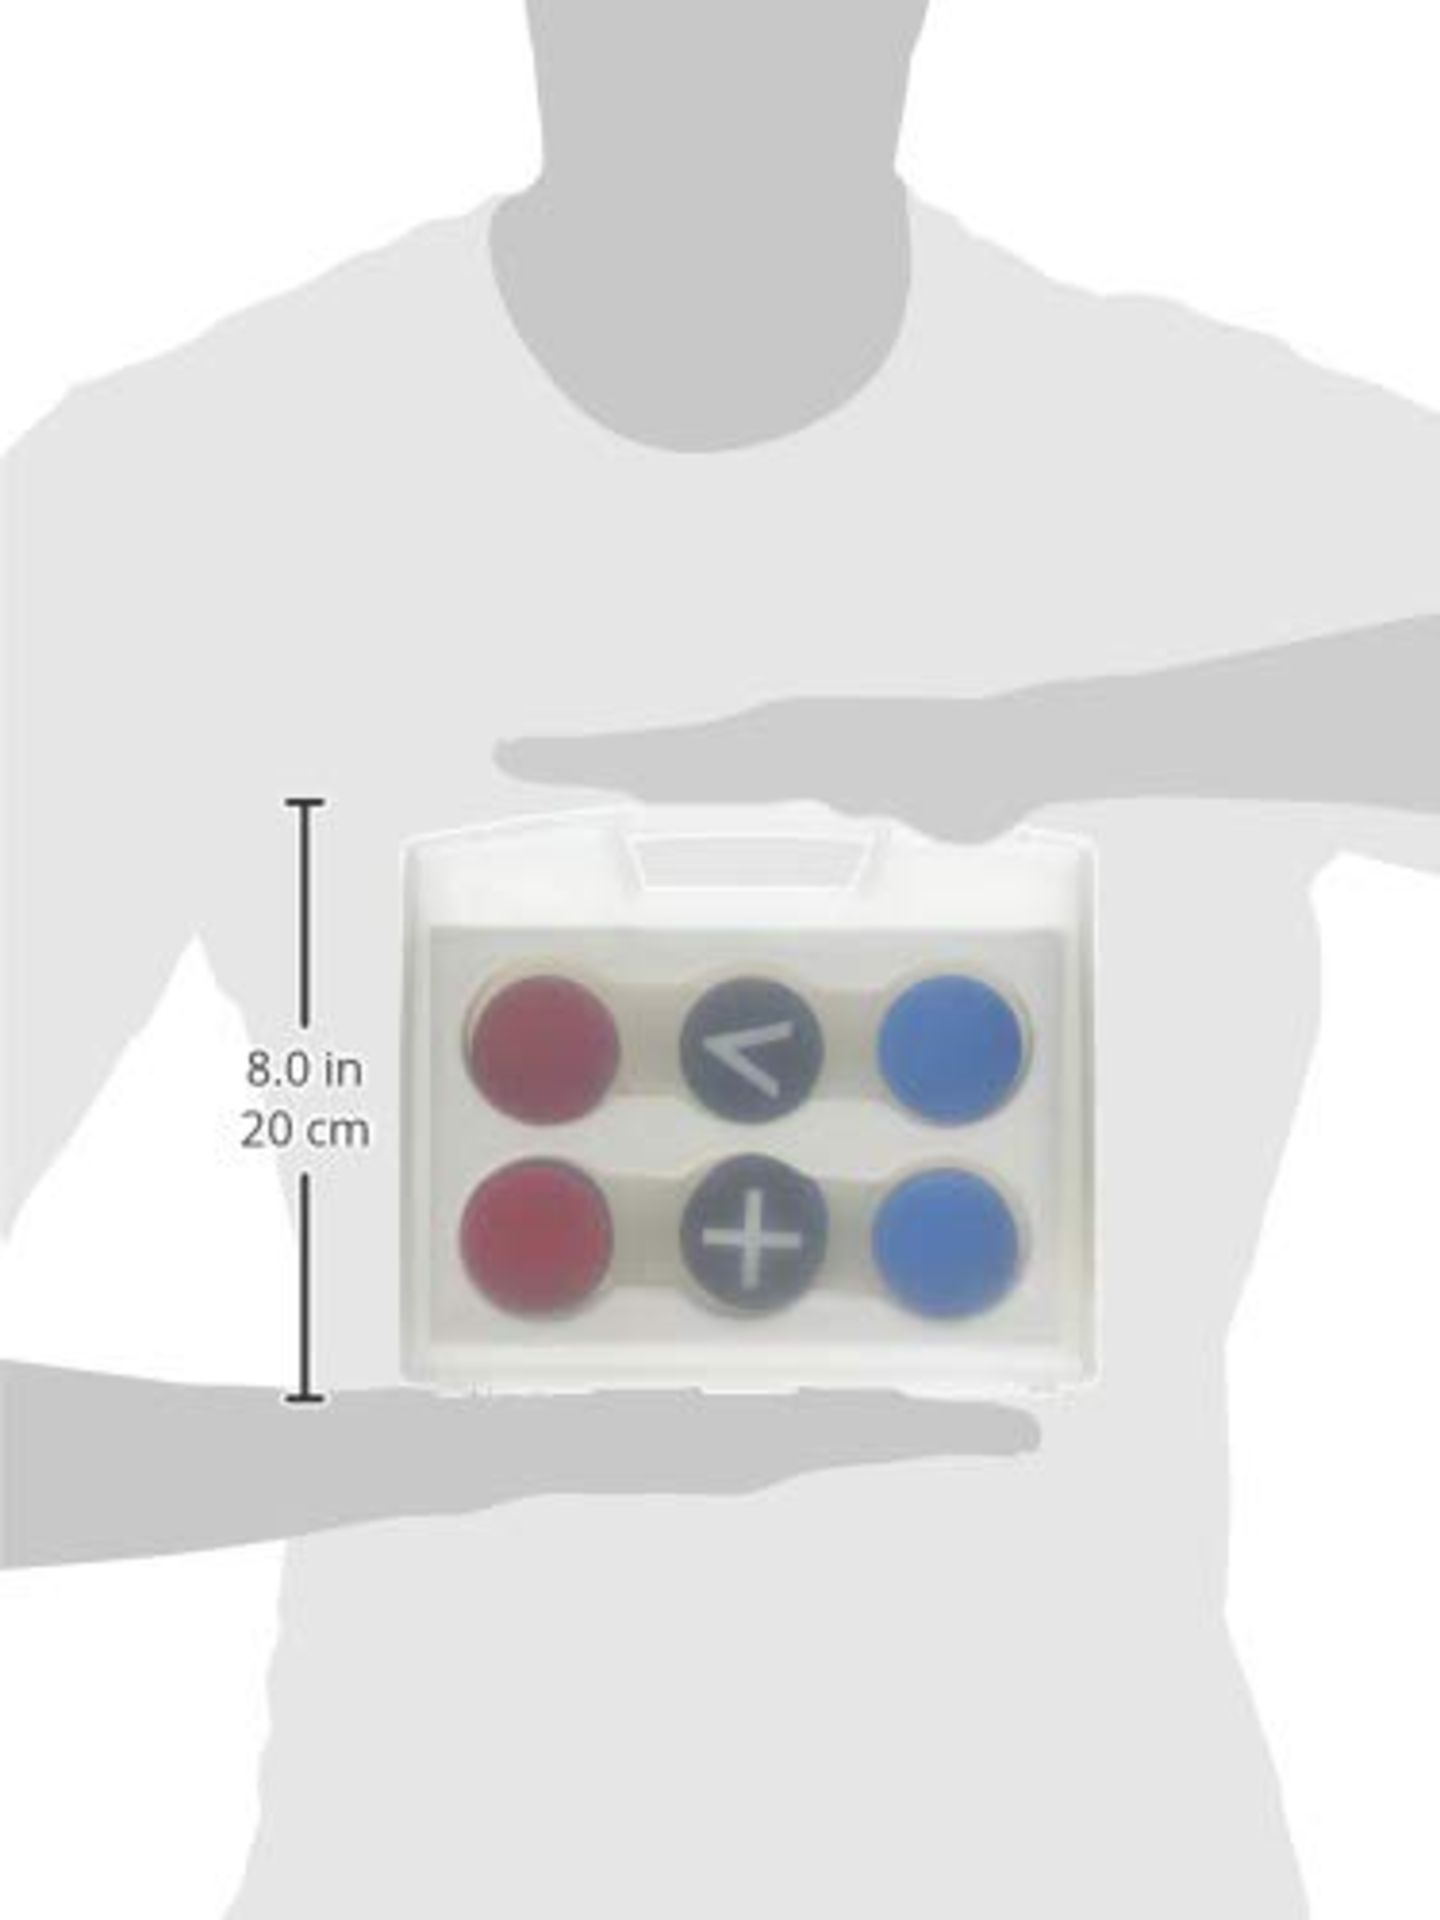 4 x WISSNER active learning 080802.000 Counting Chip Set II, Magnetic, Multi-Color |4260414062230 - Image 3 of 4